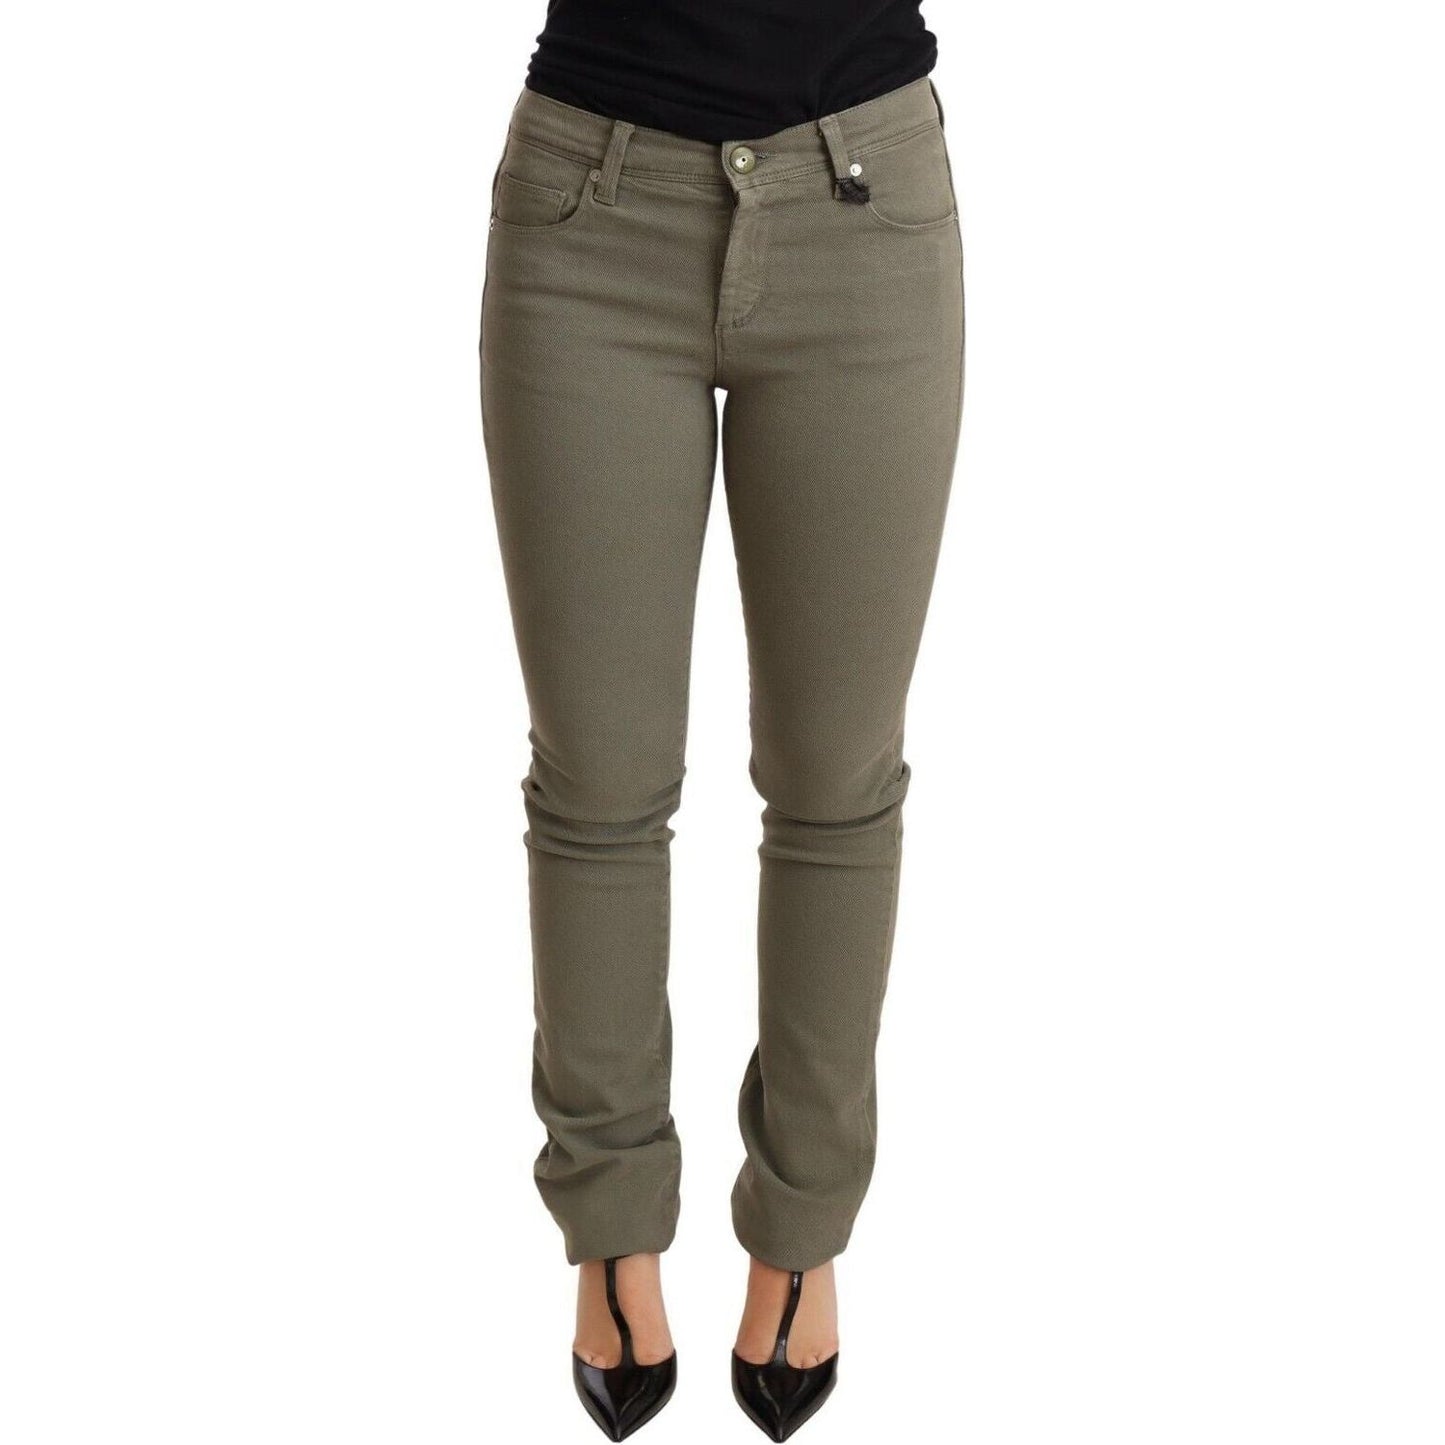 Ermanno Scervino Chic Green Low Waist Skinny Jeans Jeans & Pants green-low-waist-skinny-slim-trouser-cotton-jeans